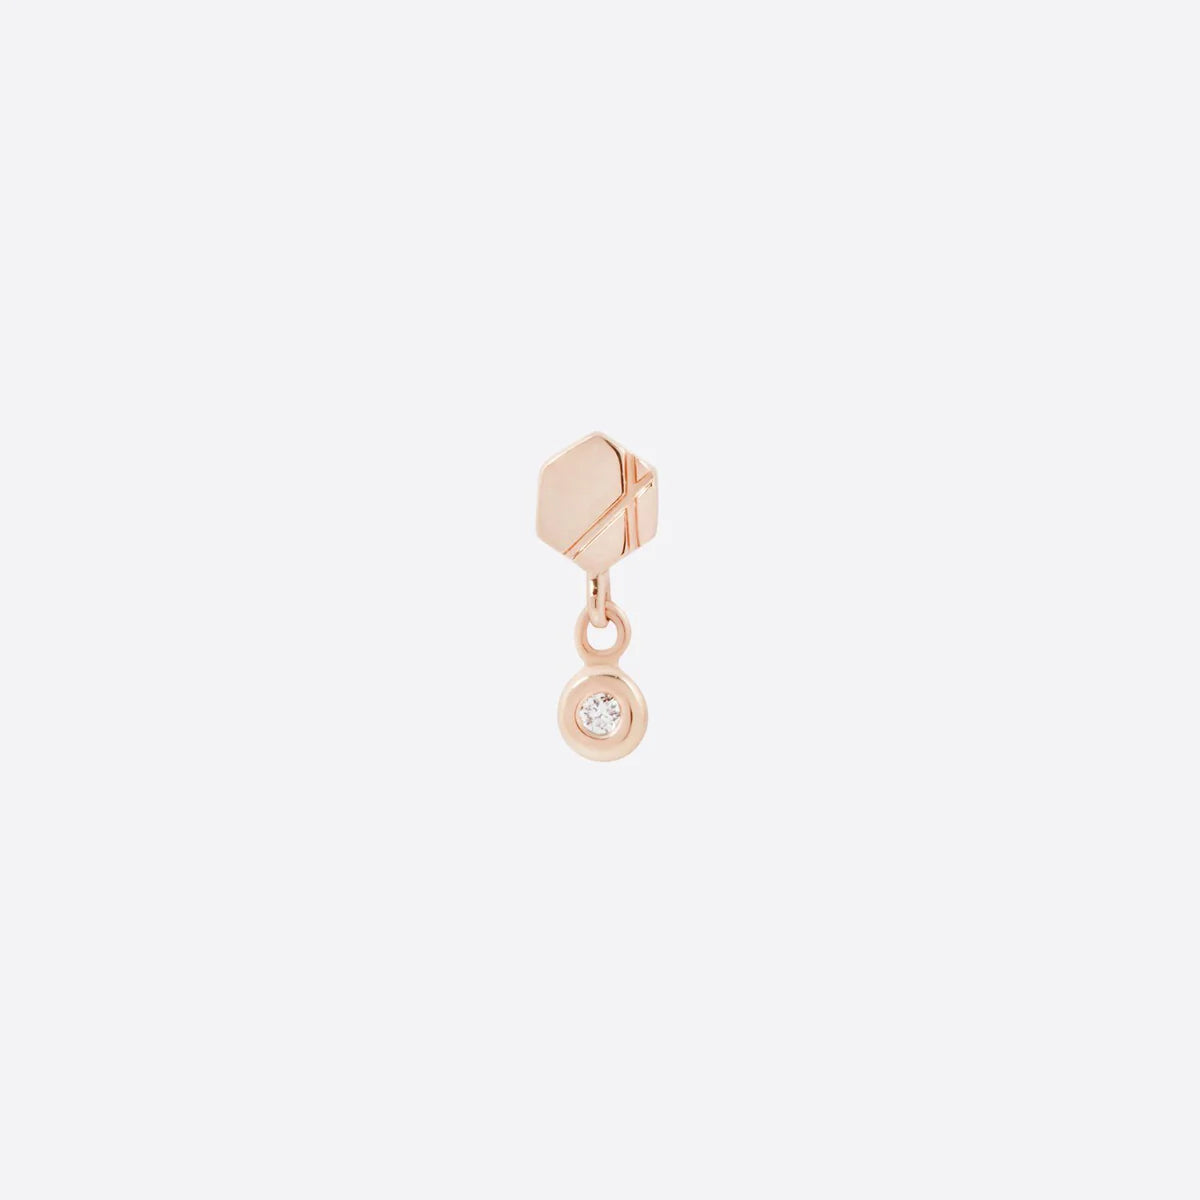 TETHER - HEX DIAMOND DROP - 14KT SOLID GOLD - THREADLESS END